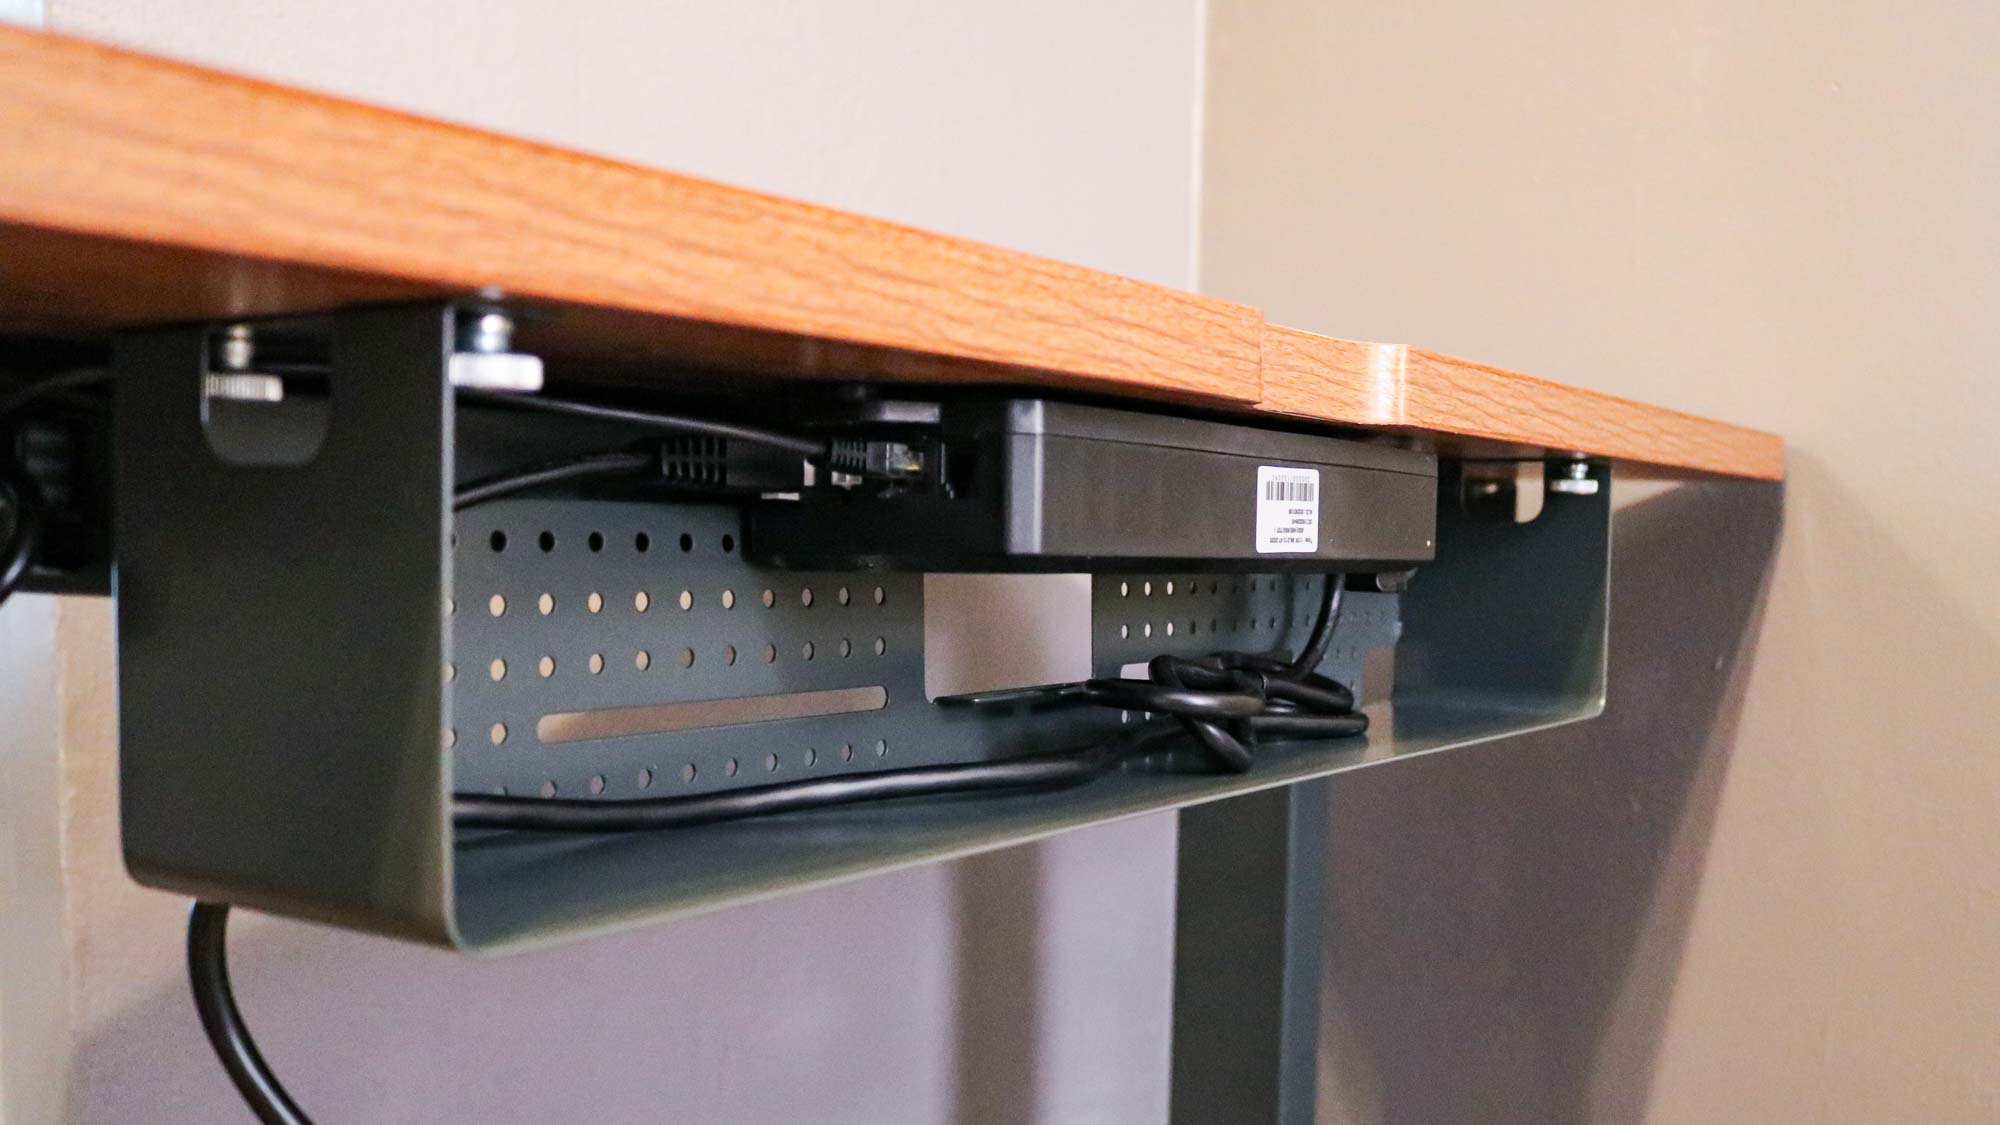 The optional cable management tray for the Branch Duo Standing Desk